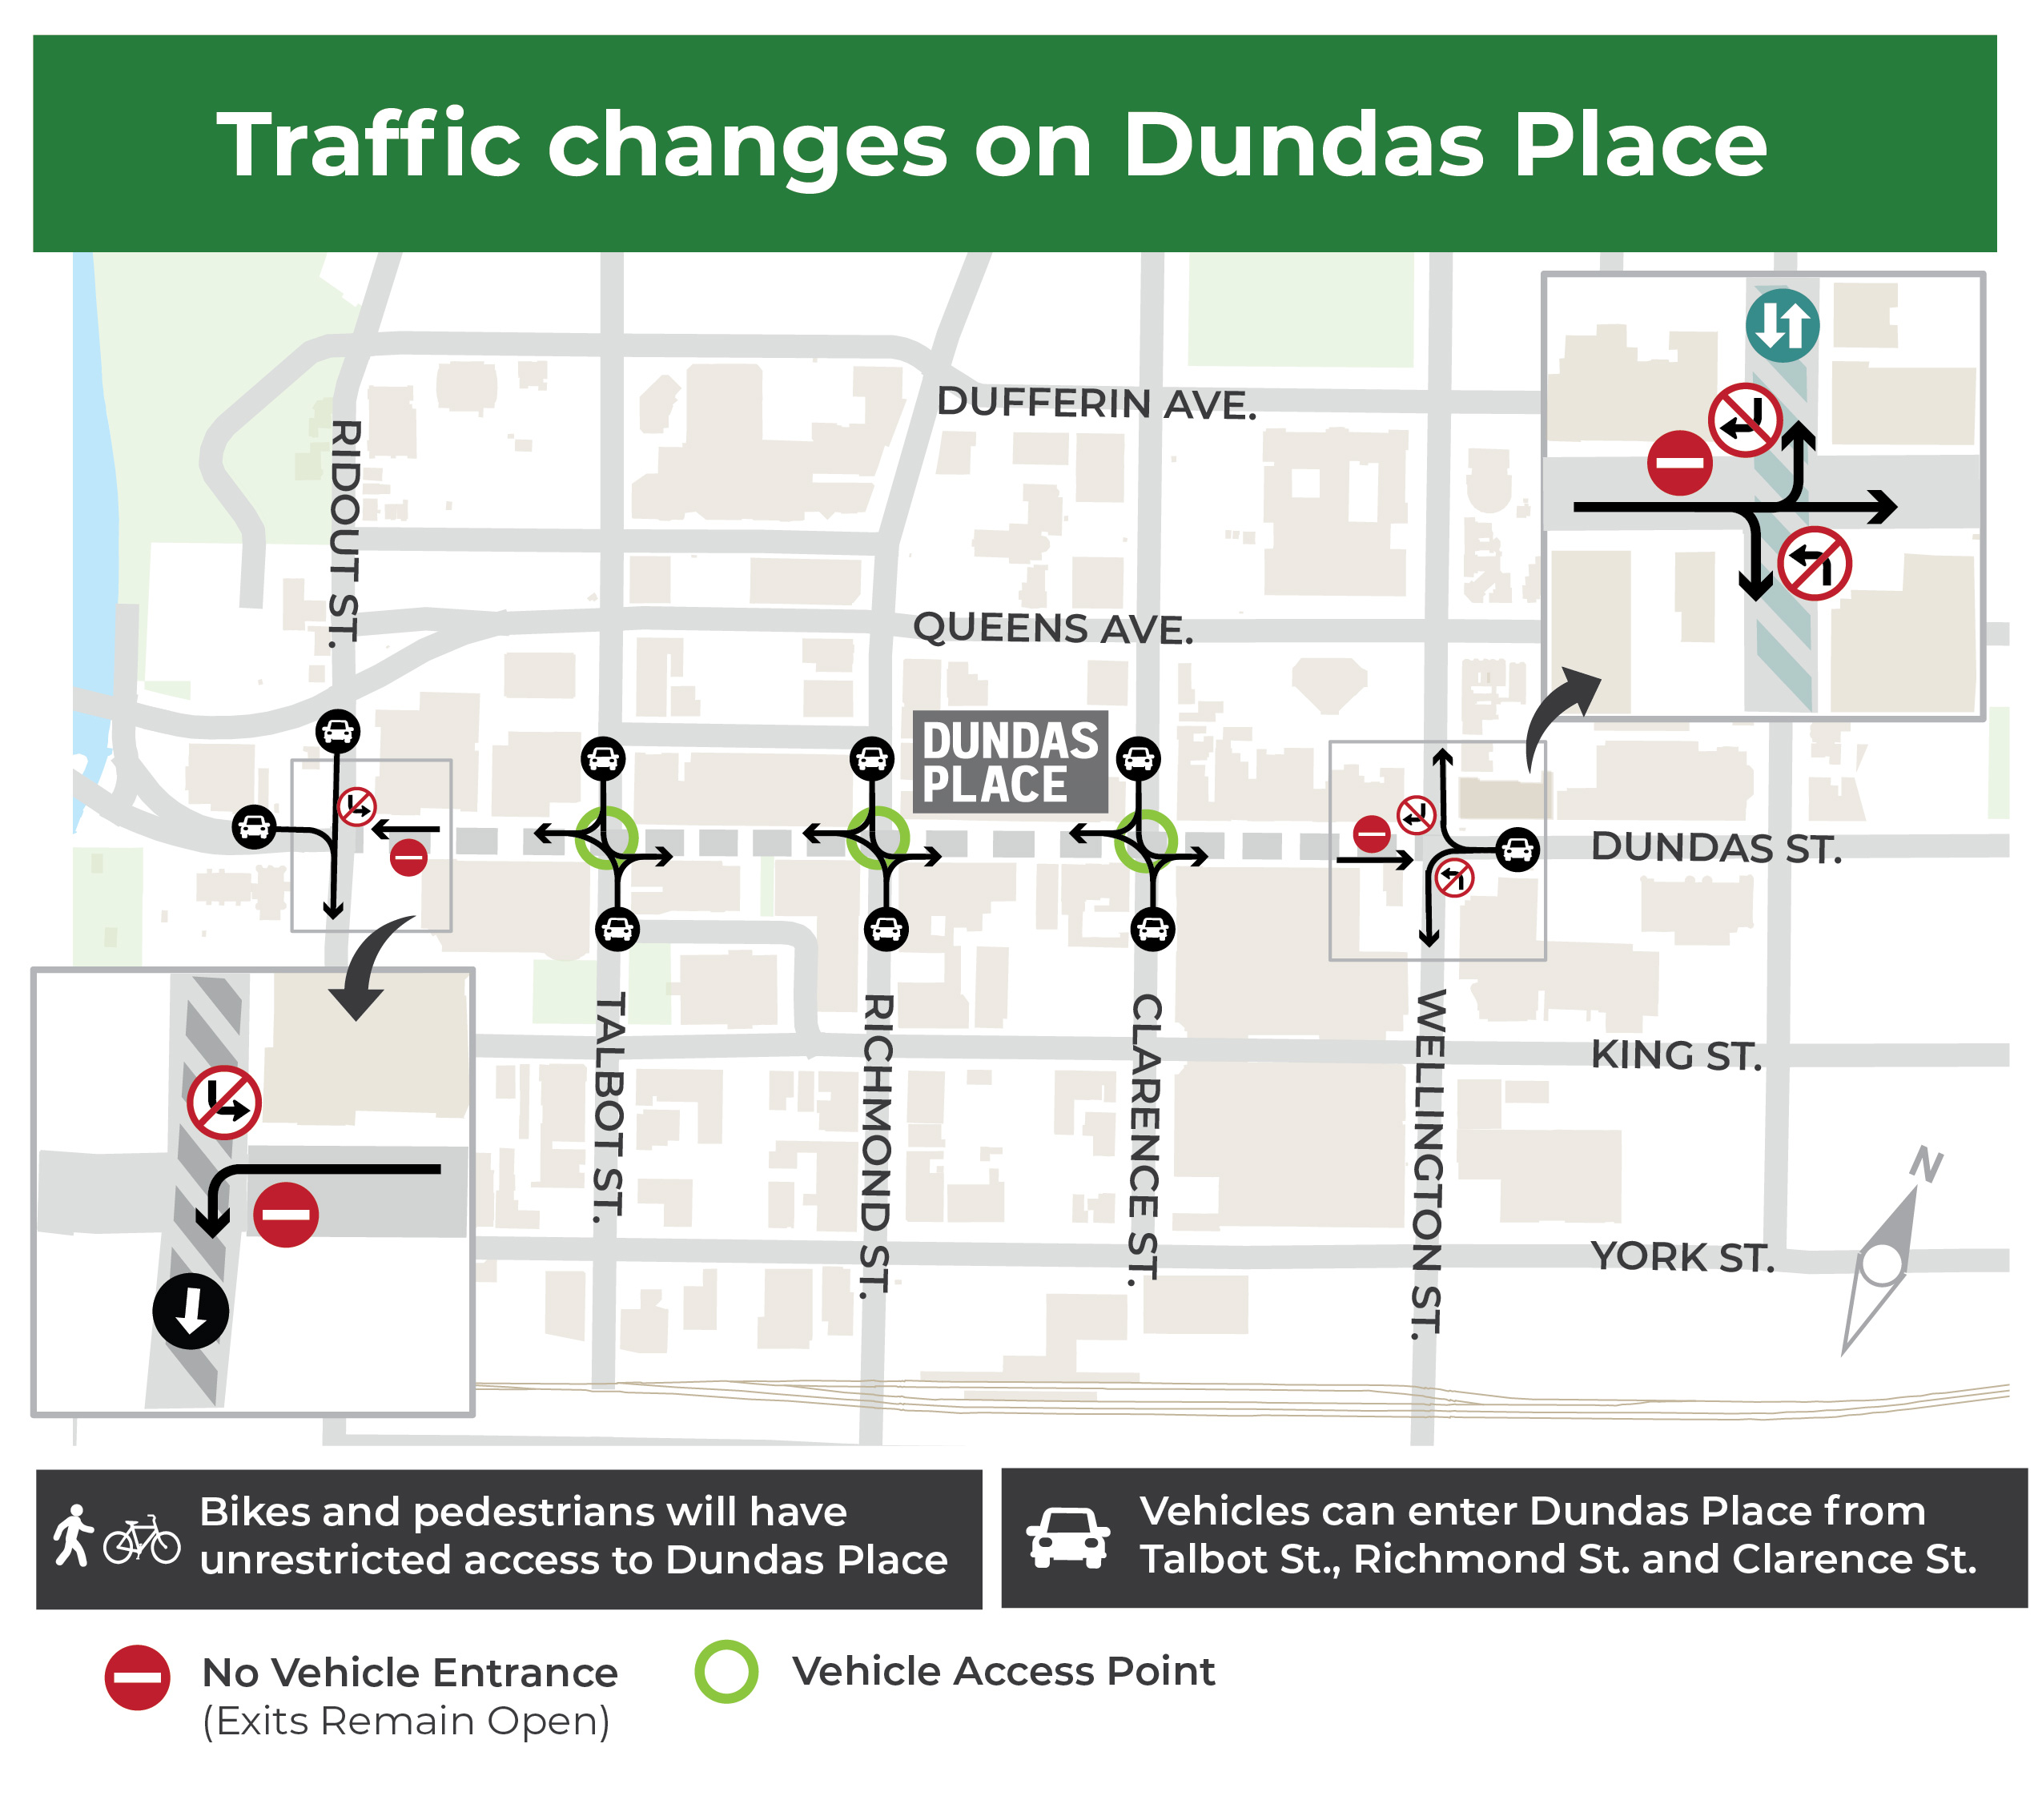 A map graphic showing traffic diversions on Dundas Place to support safety and mobility for all during construction. 